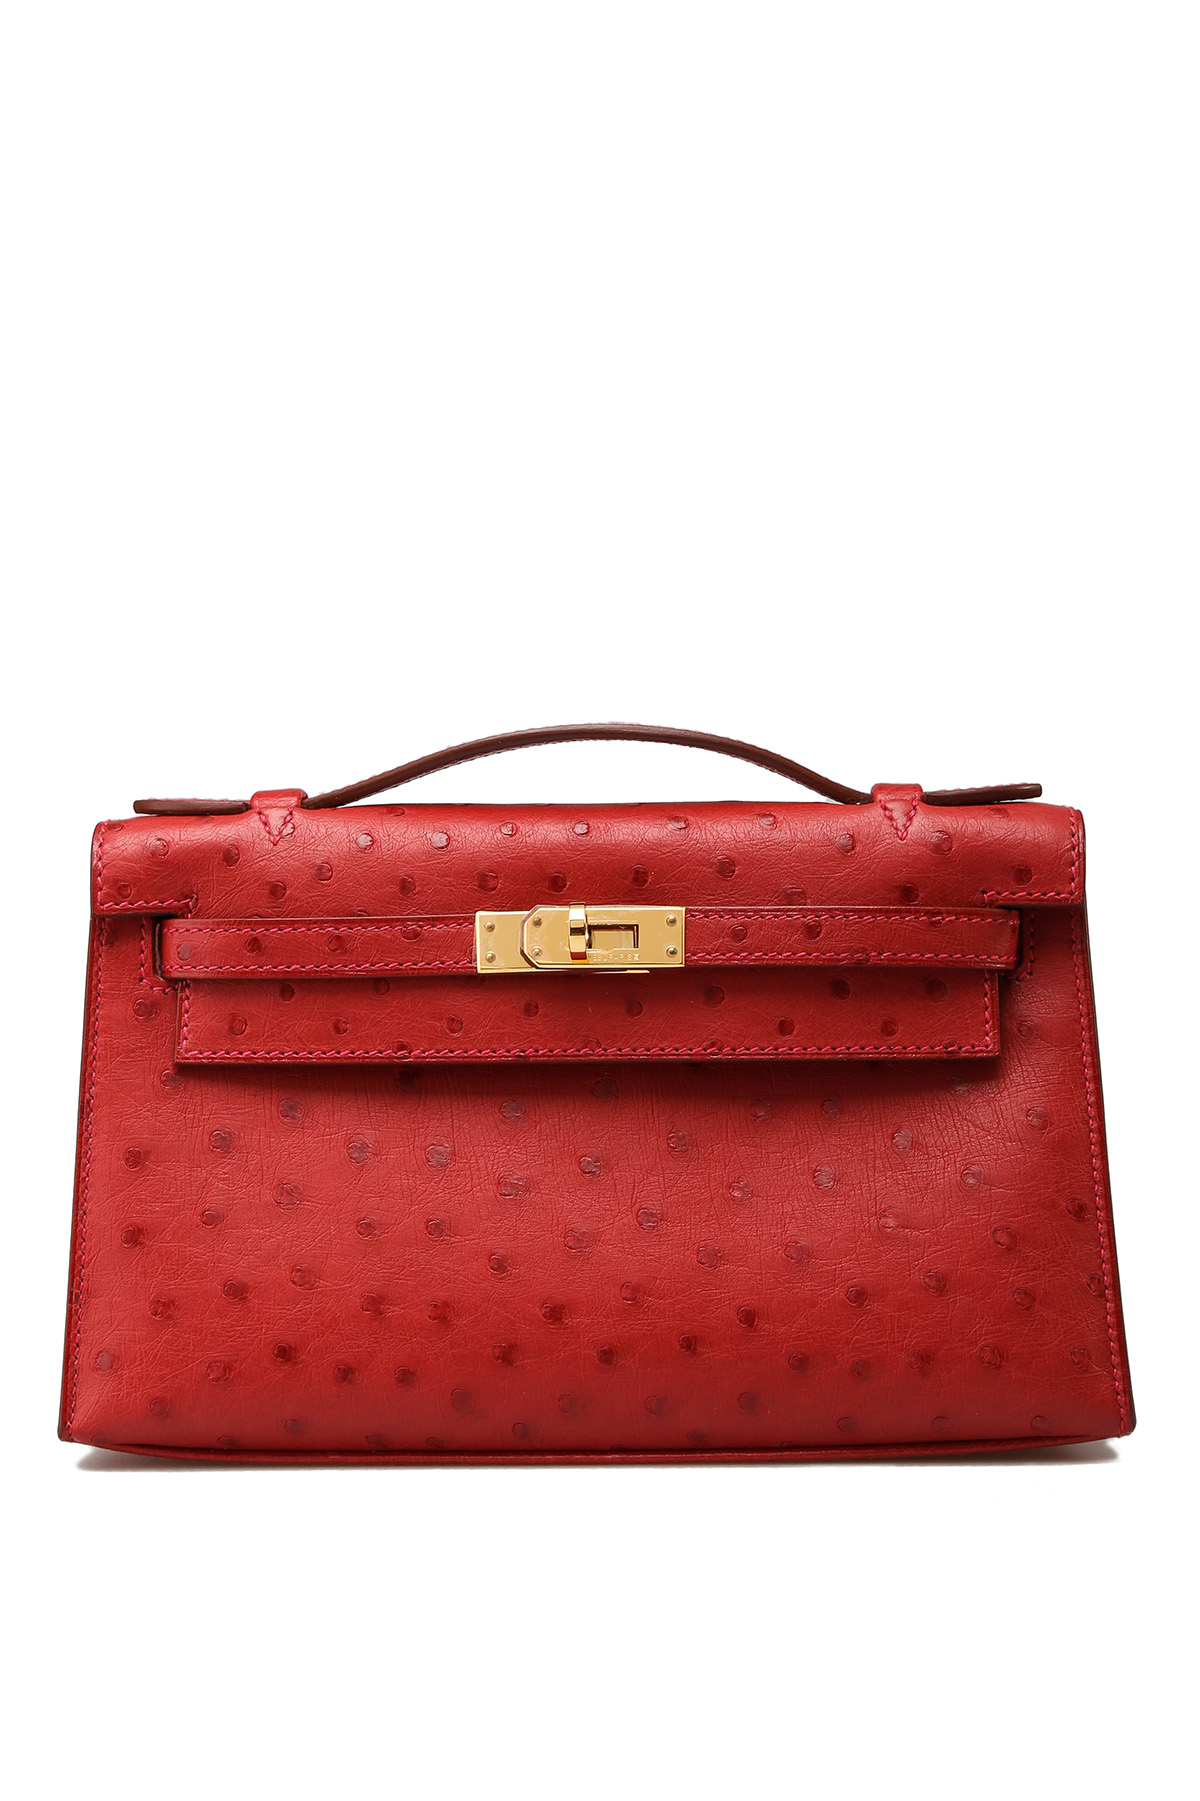 Hermes Rouge Vif Ostrich Kelly Pochette Bag with Gold Hardware. A